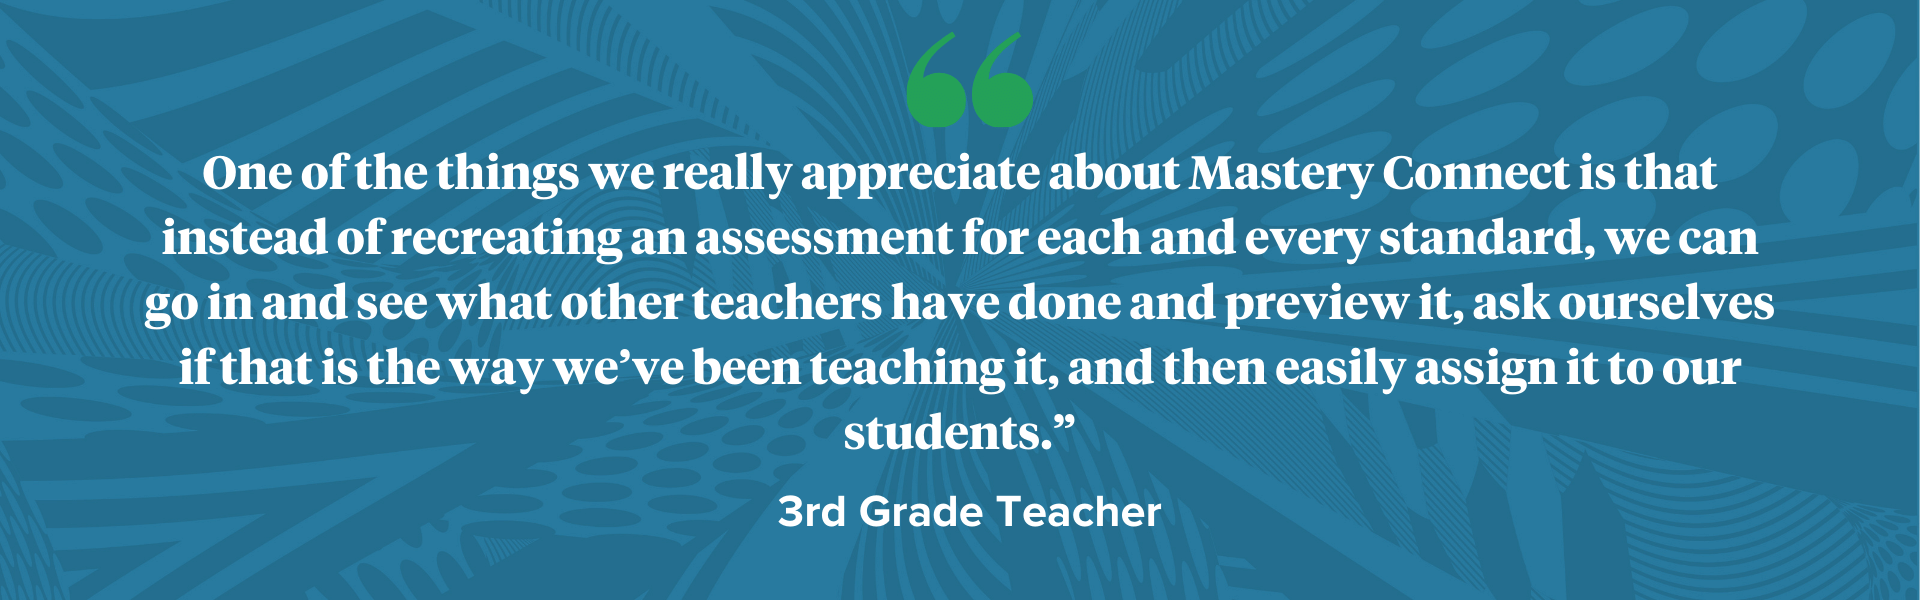 One of the things we appreciate about Mastery Connect is access quote by third grade teacher